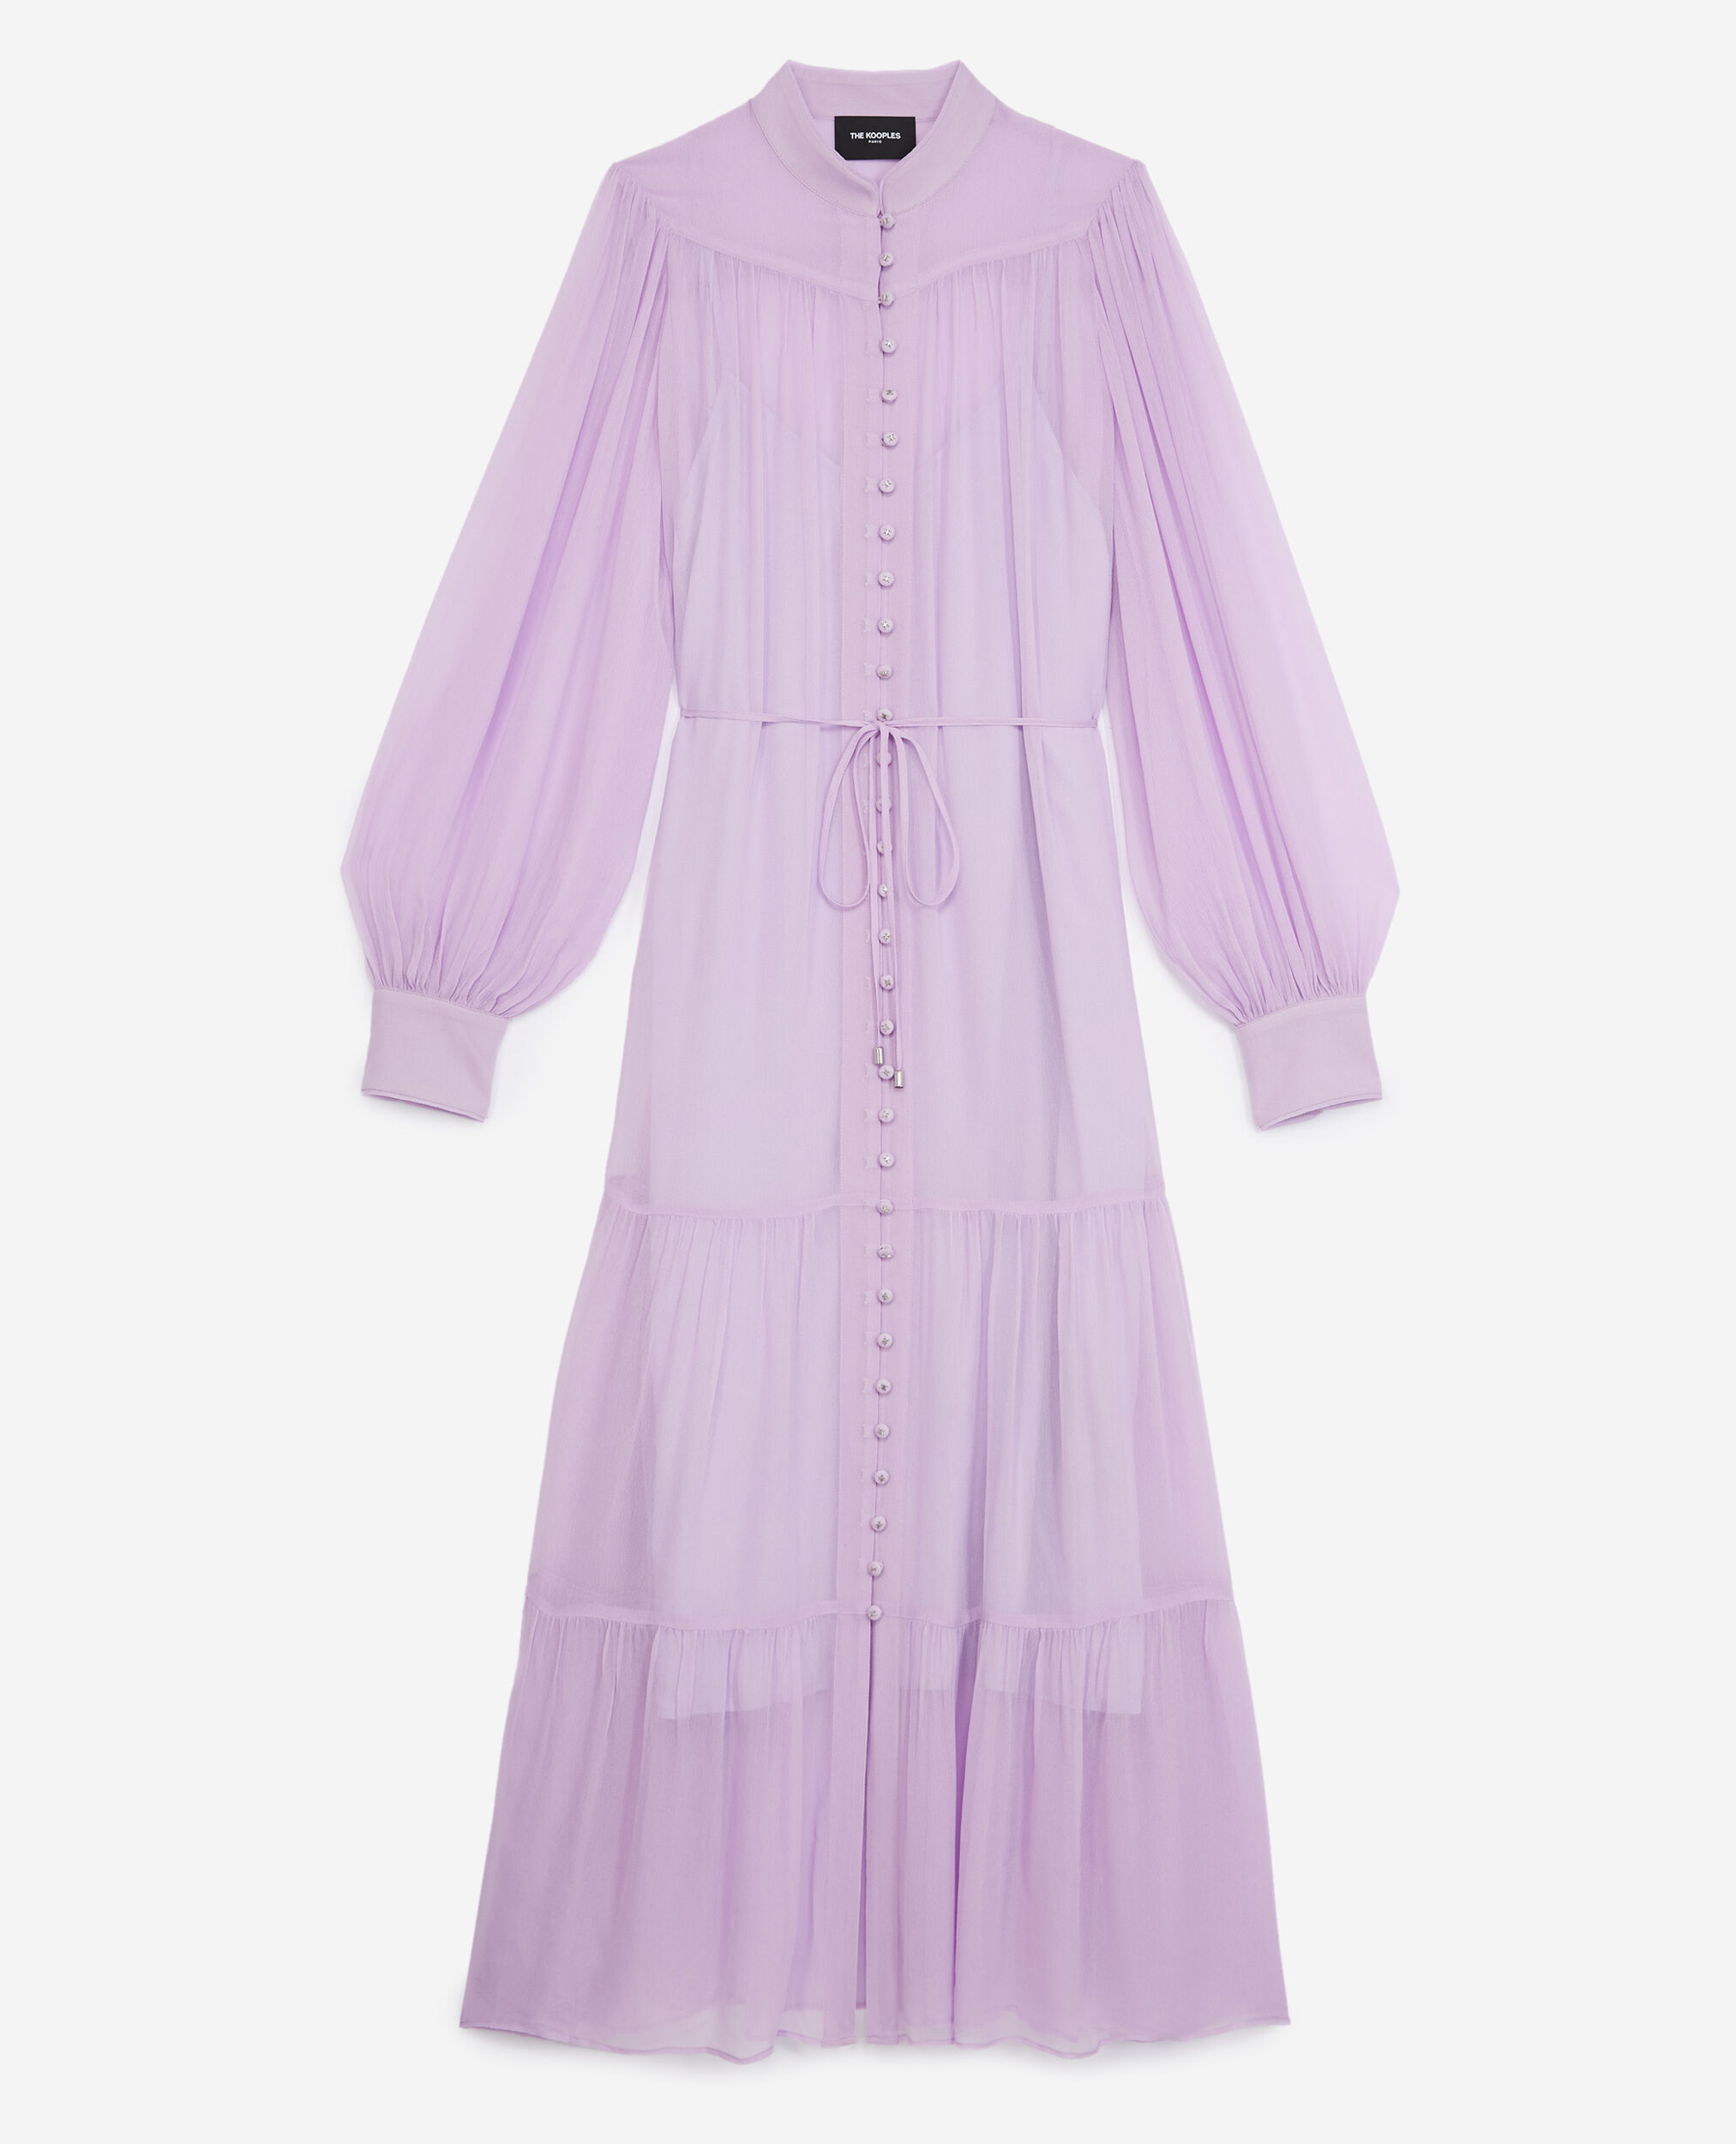 Long purple dress with frills and belt, MAUVE, hi-res image number null